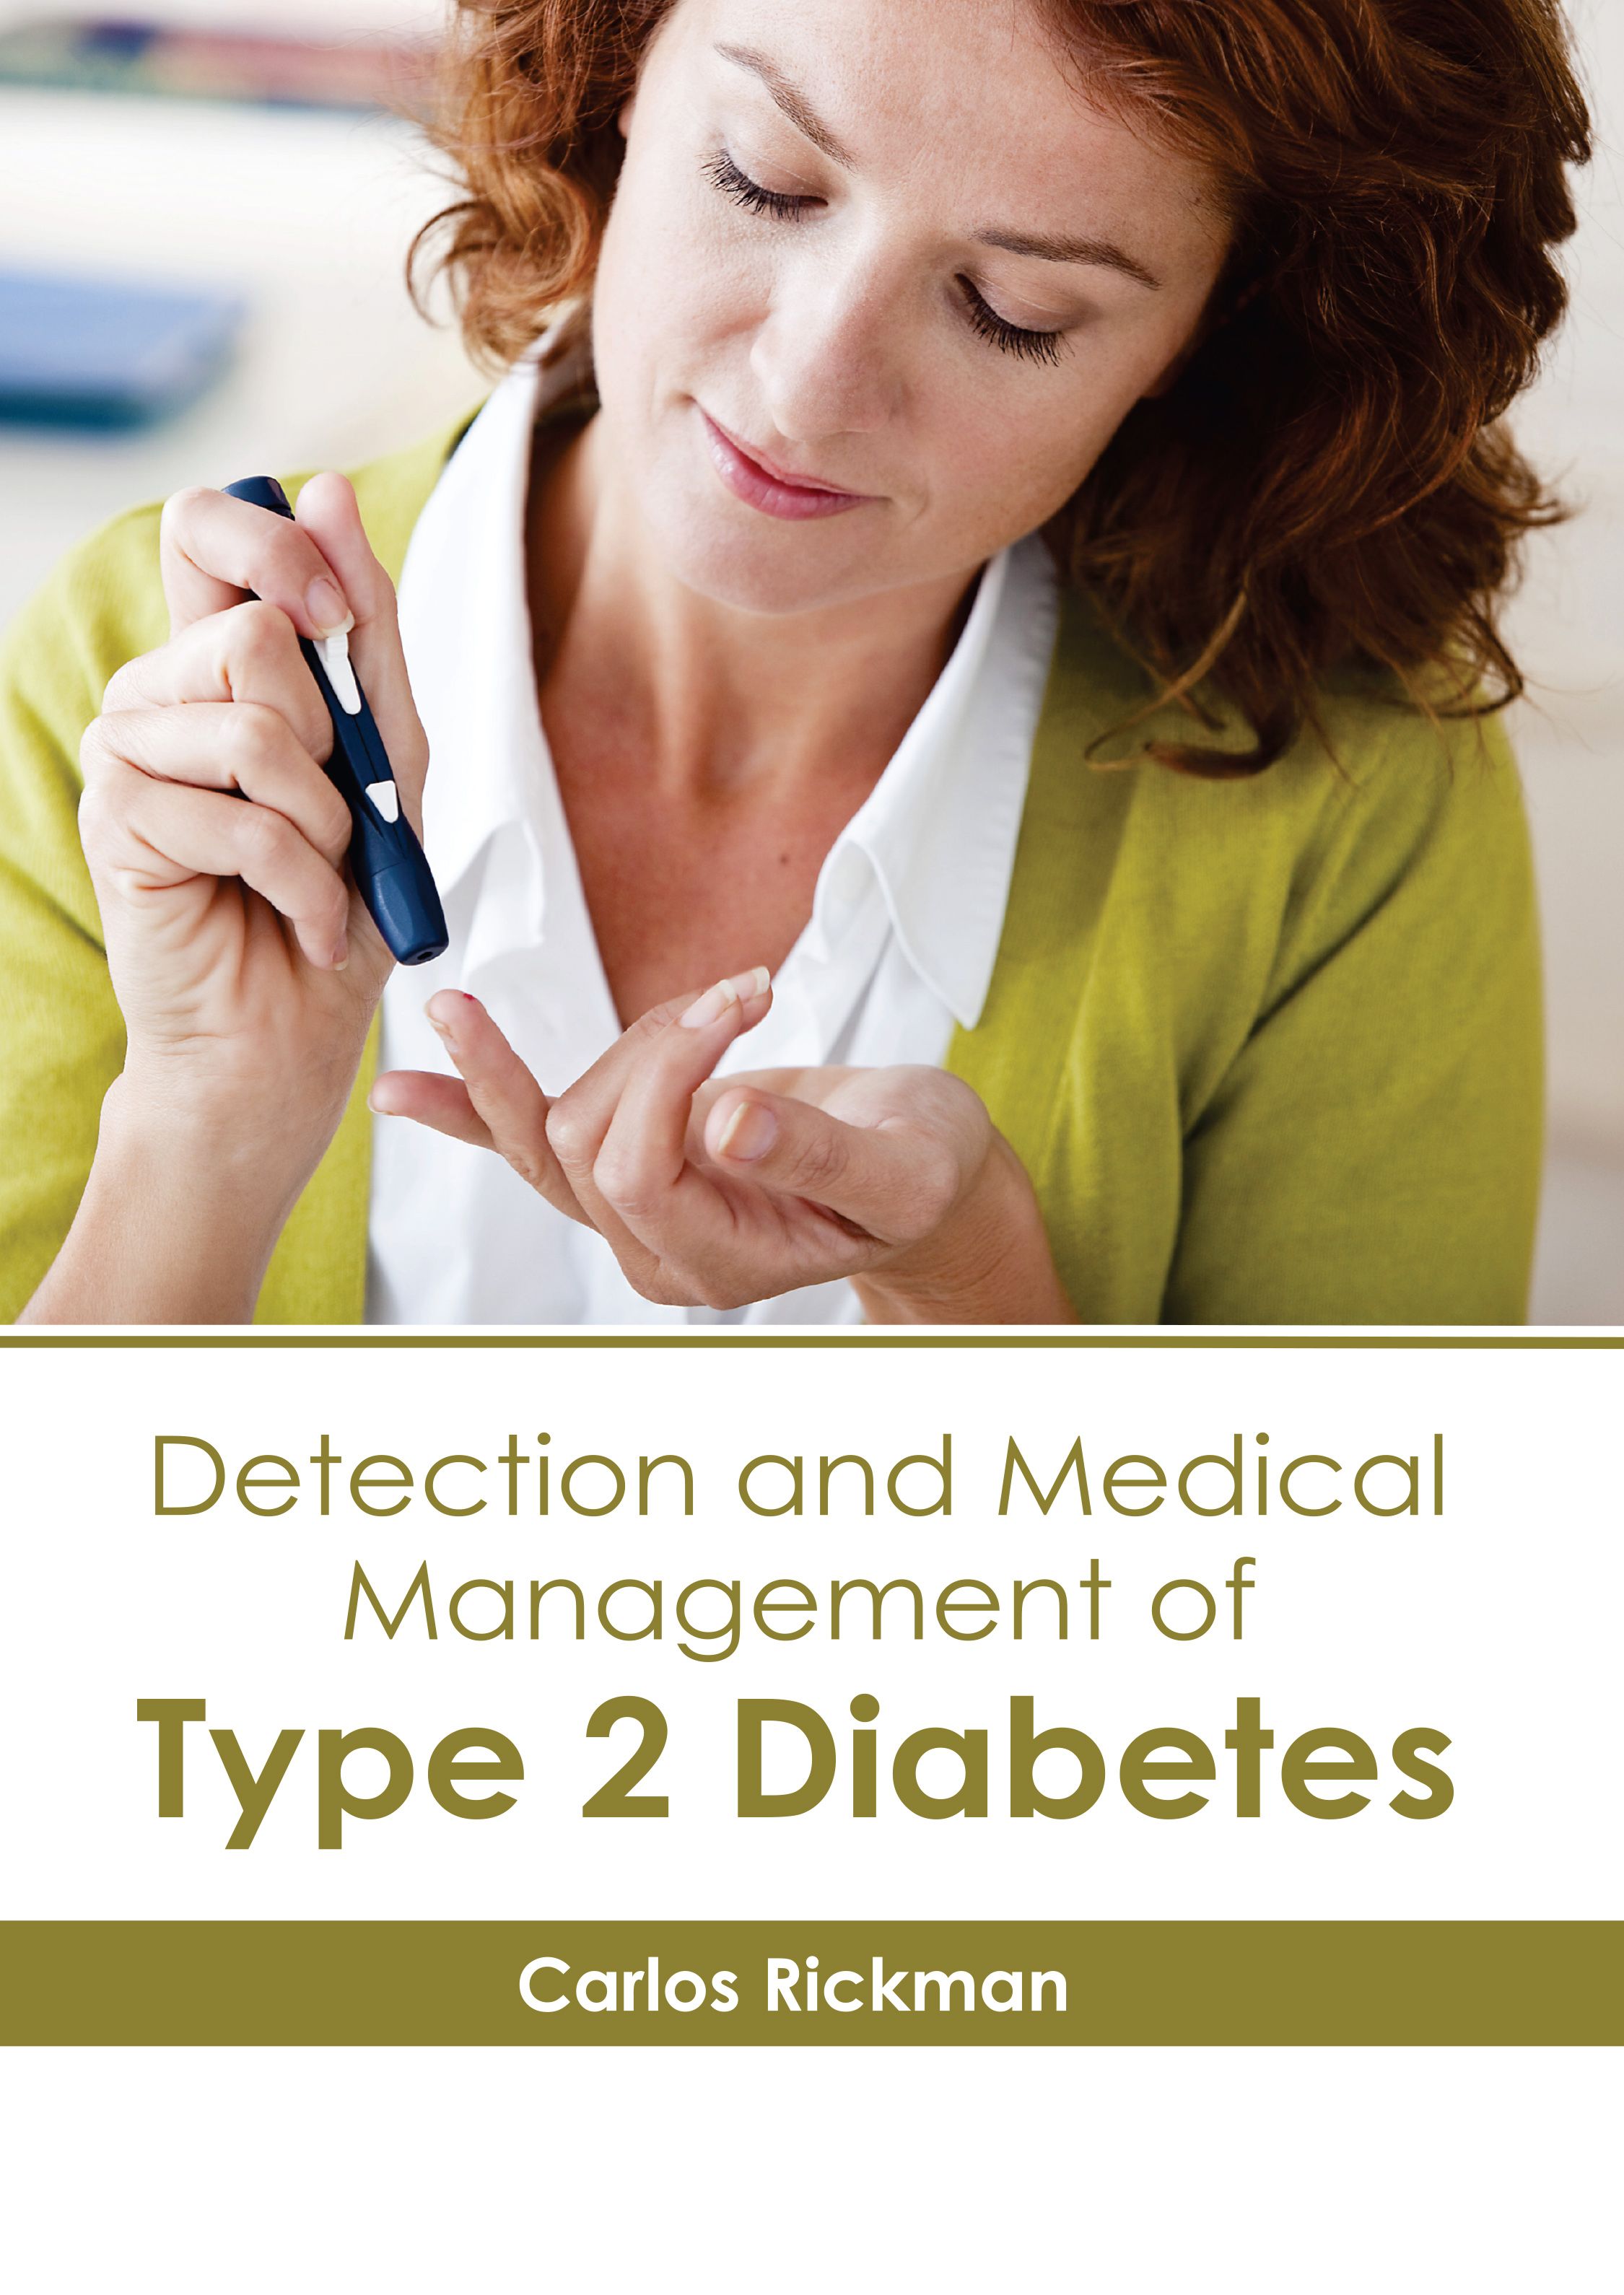 DETECTION AND MEDICAL MANAGEMENT OF TYPE 2 DIABETES